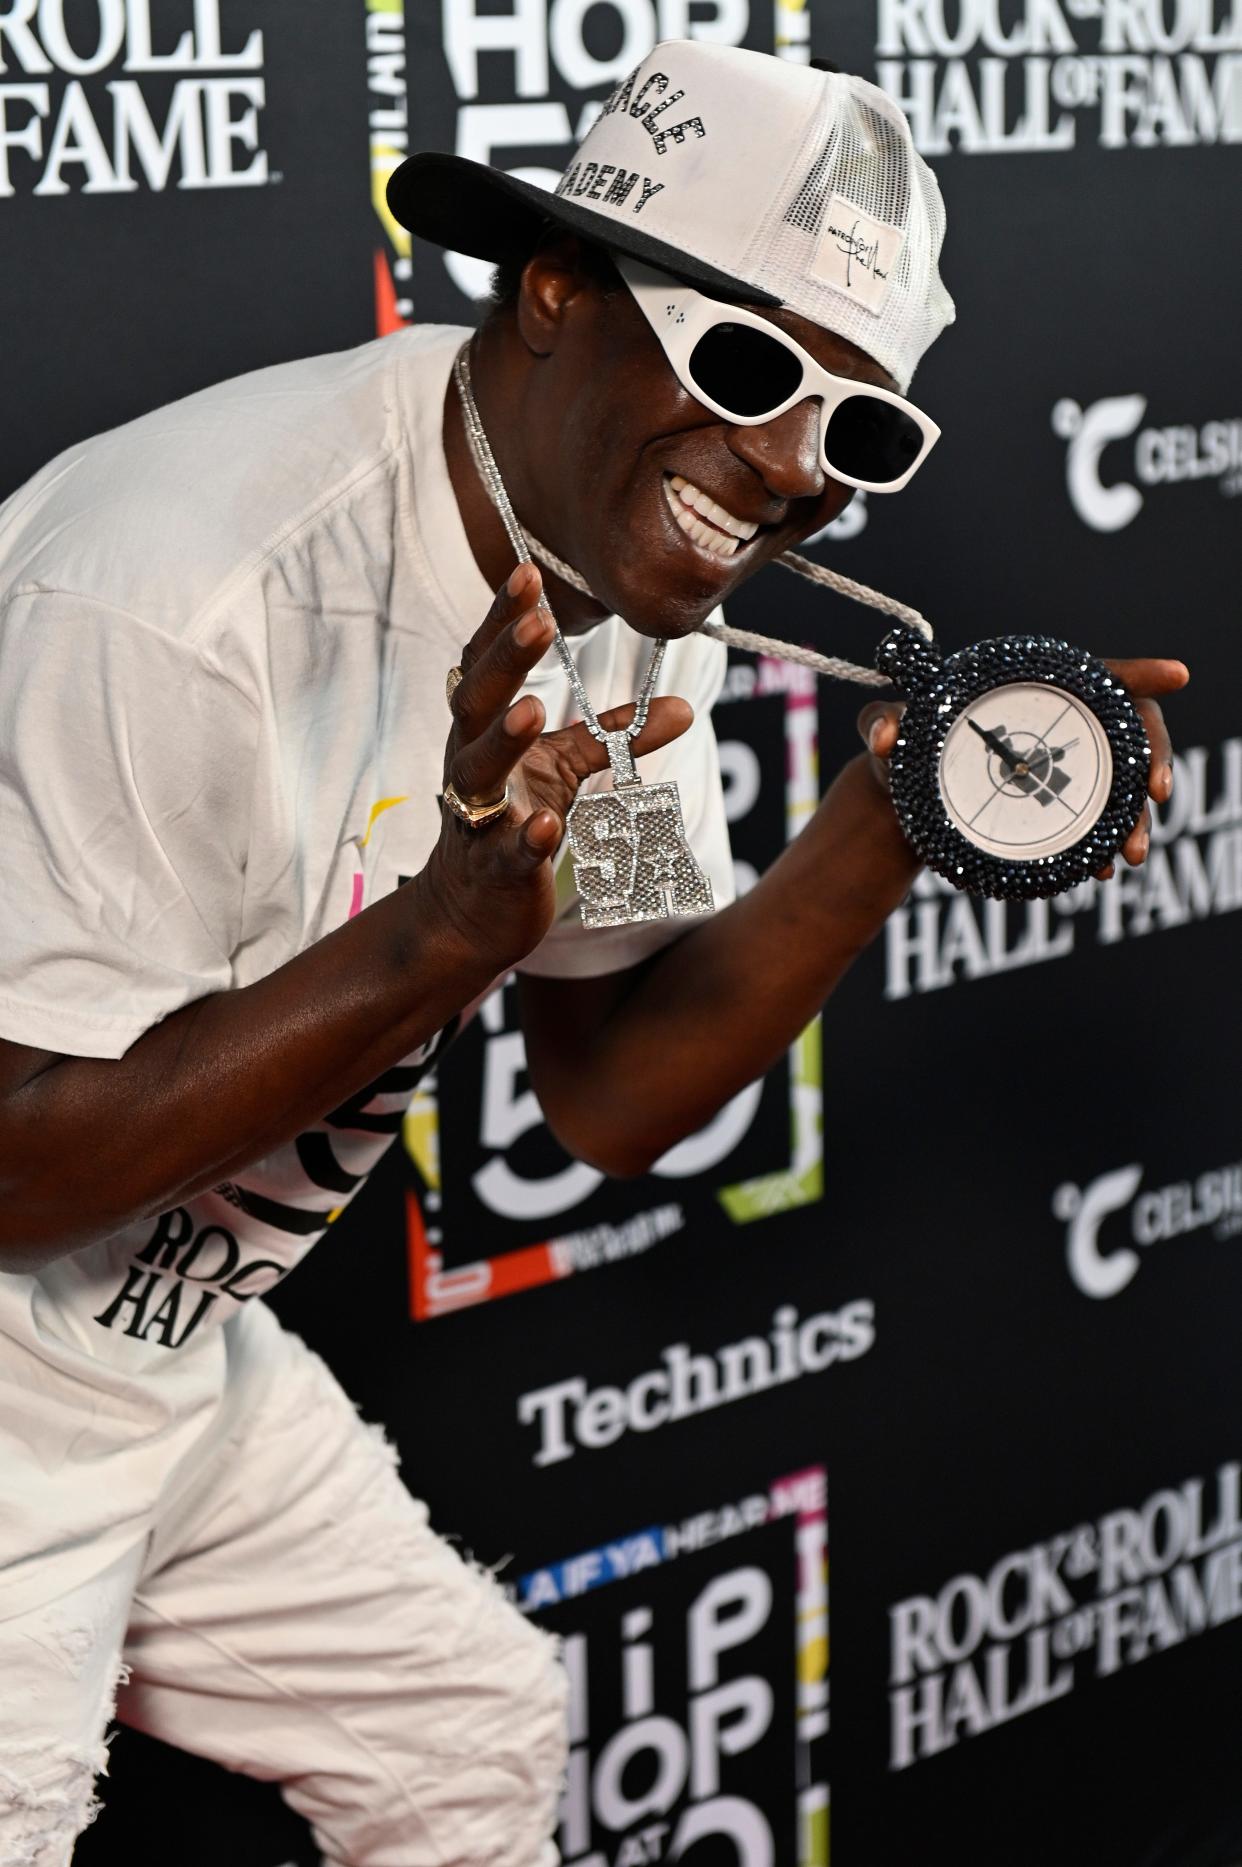 Flavor Flav shows off custom necklaces while attending a Hip-Hop at 50 event in Cleveland, Ohio.